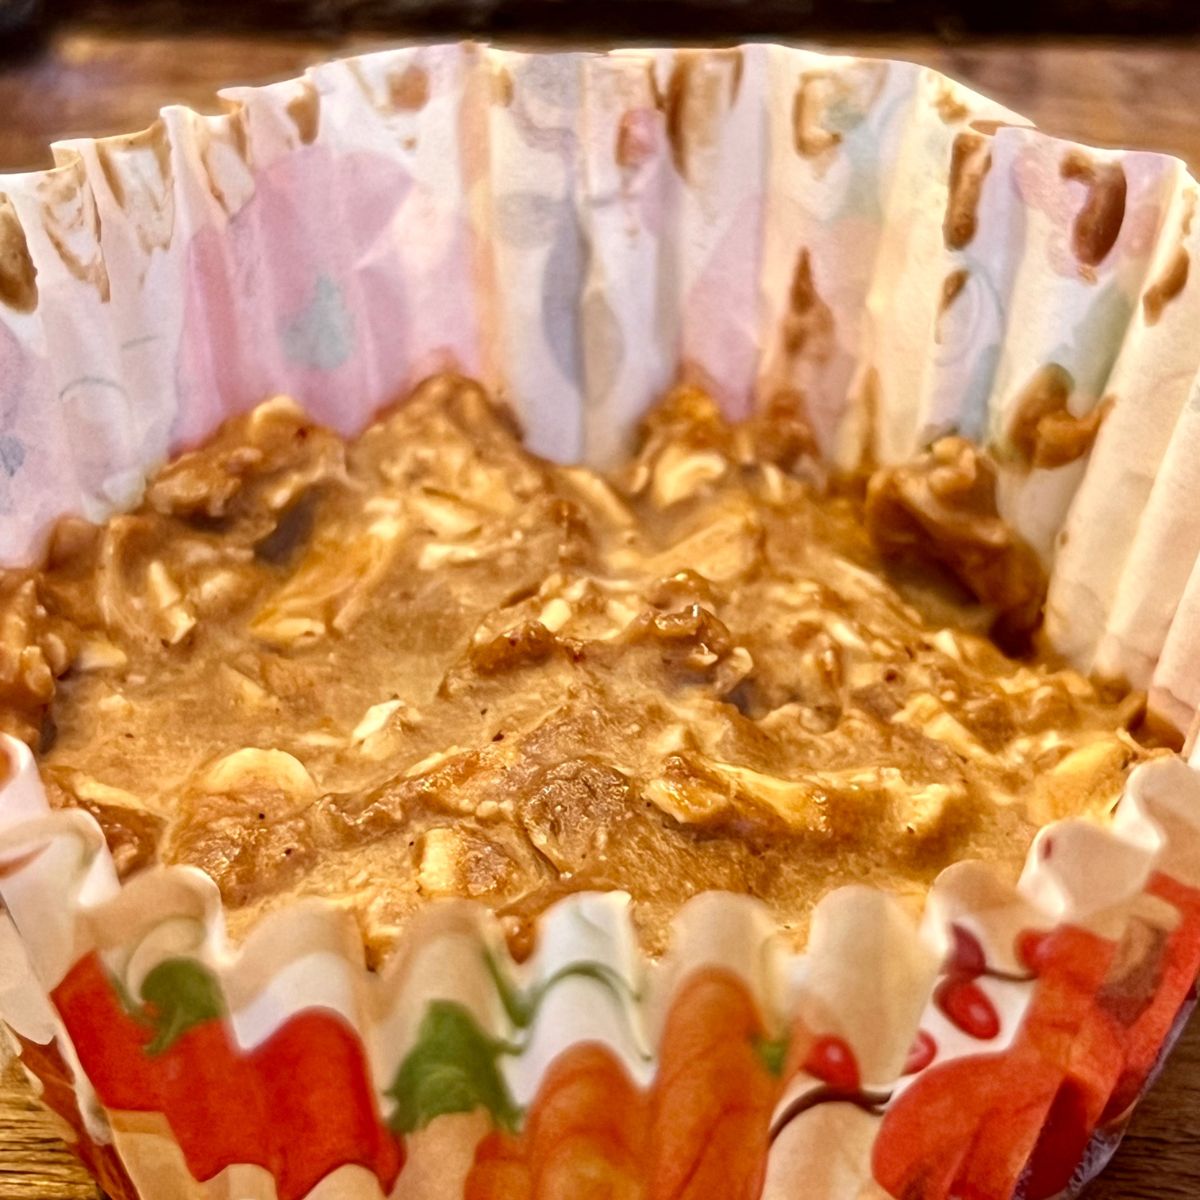 A no bake breakfast muffin in a holiday paper liner